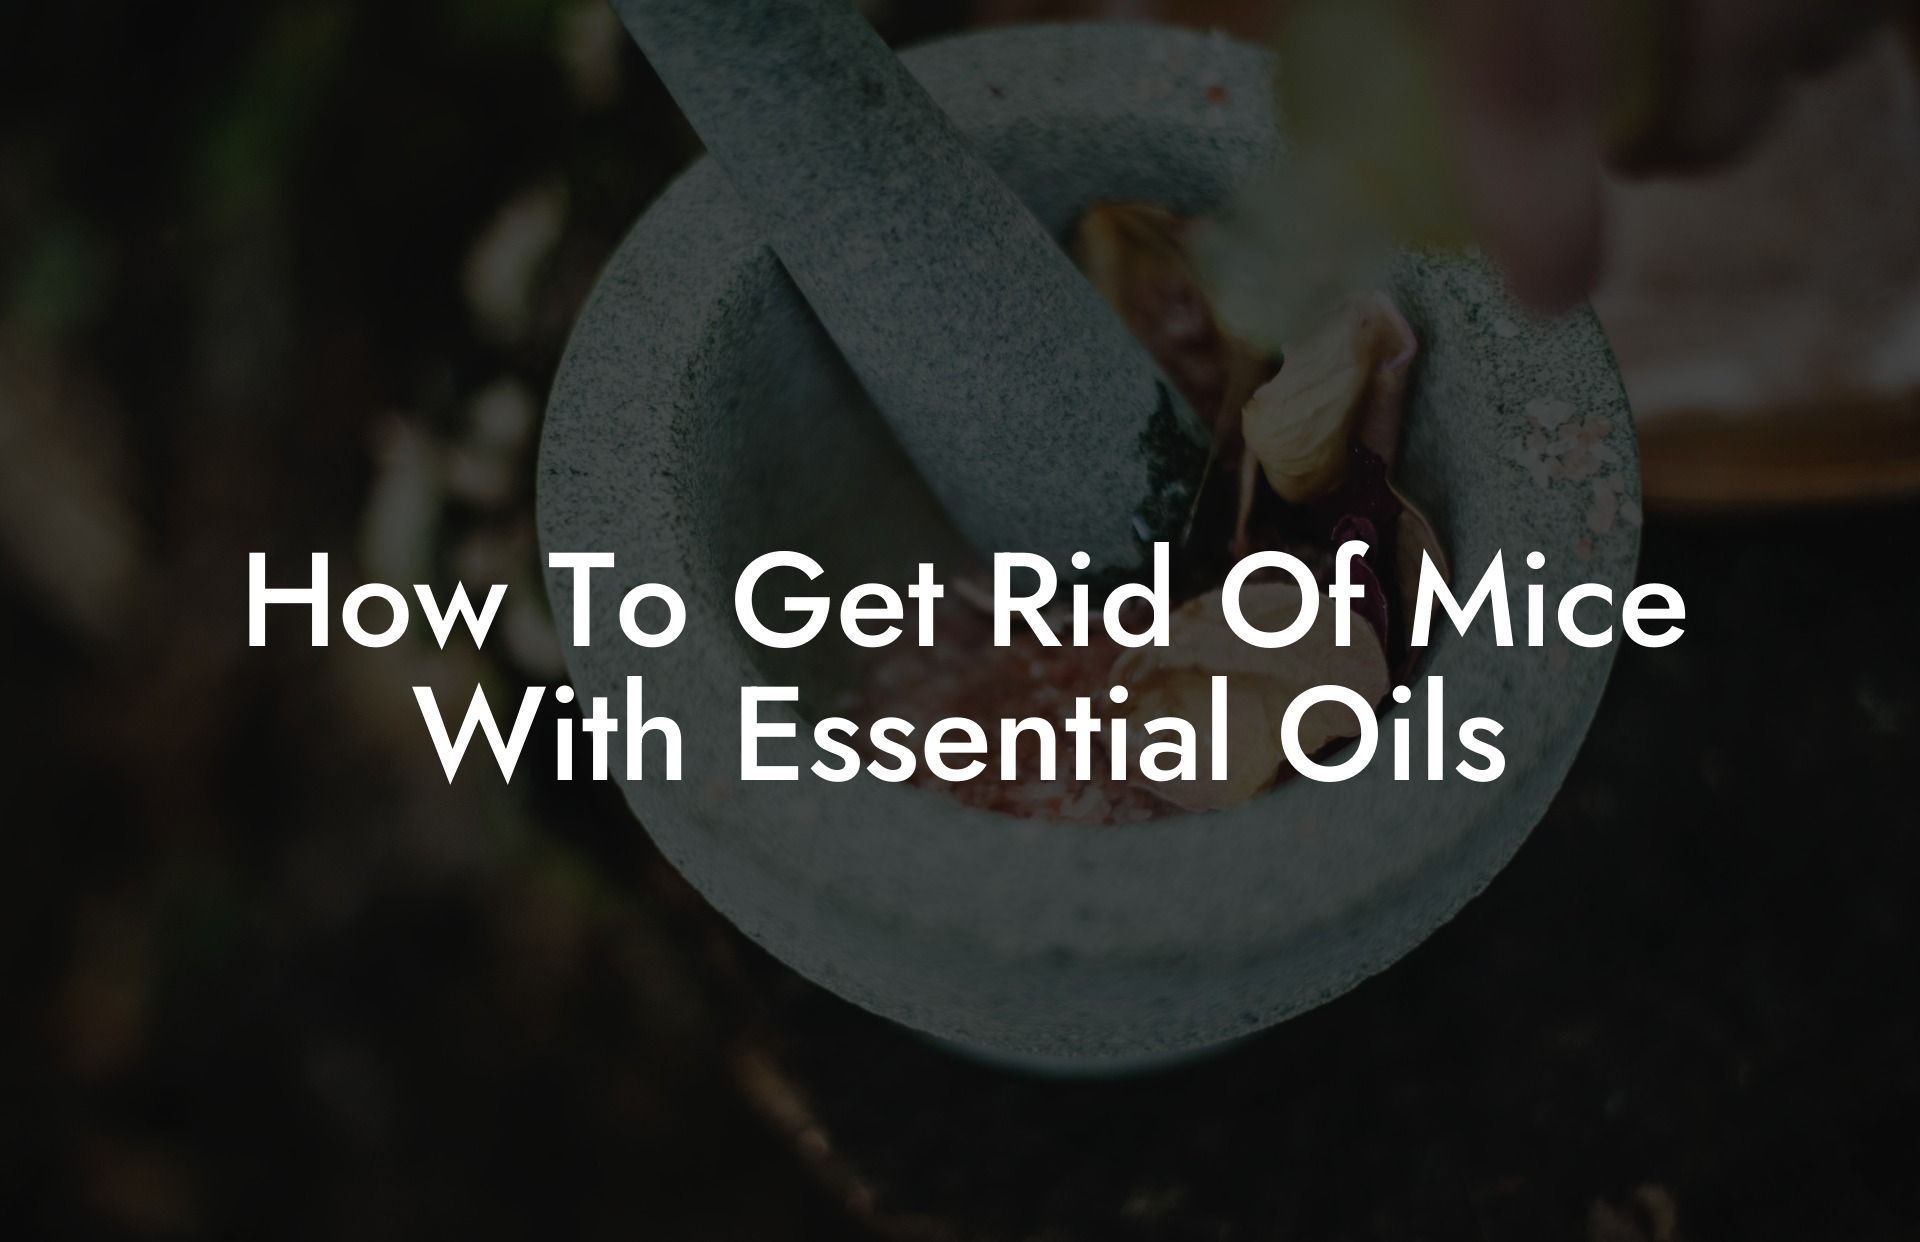 How To Get Rid Of Mice With Essential Oils